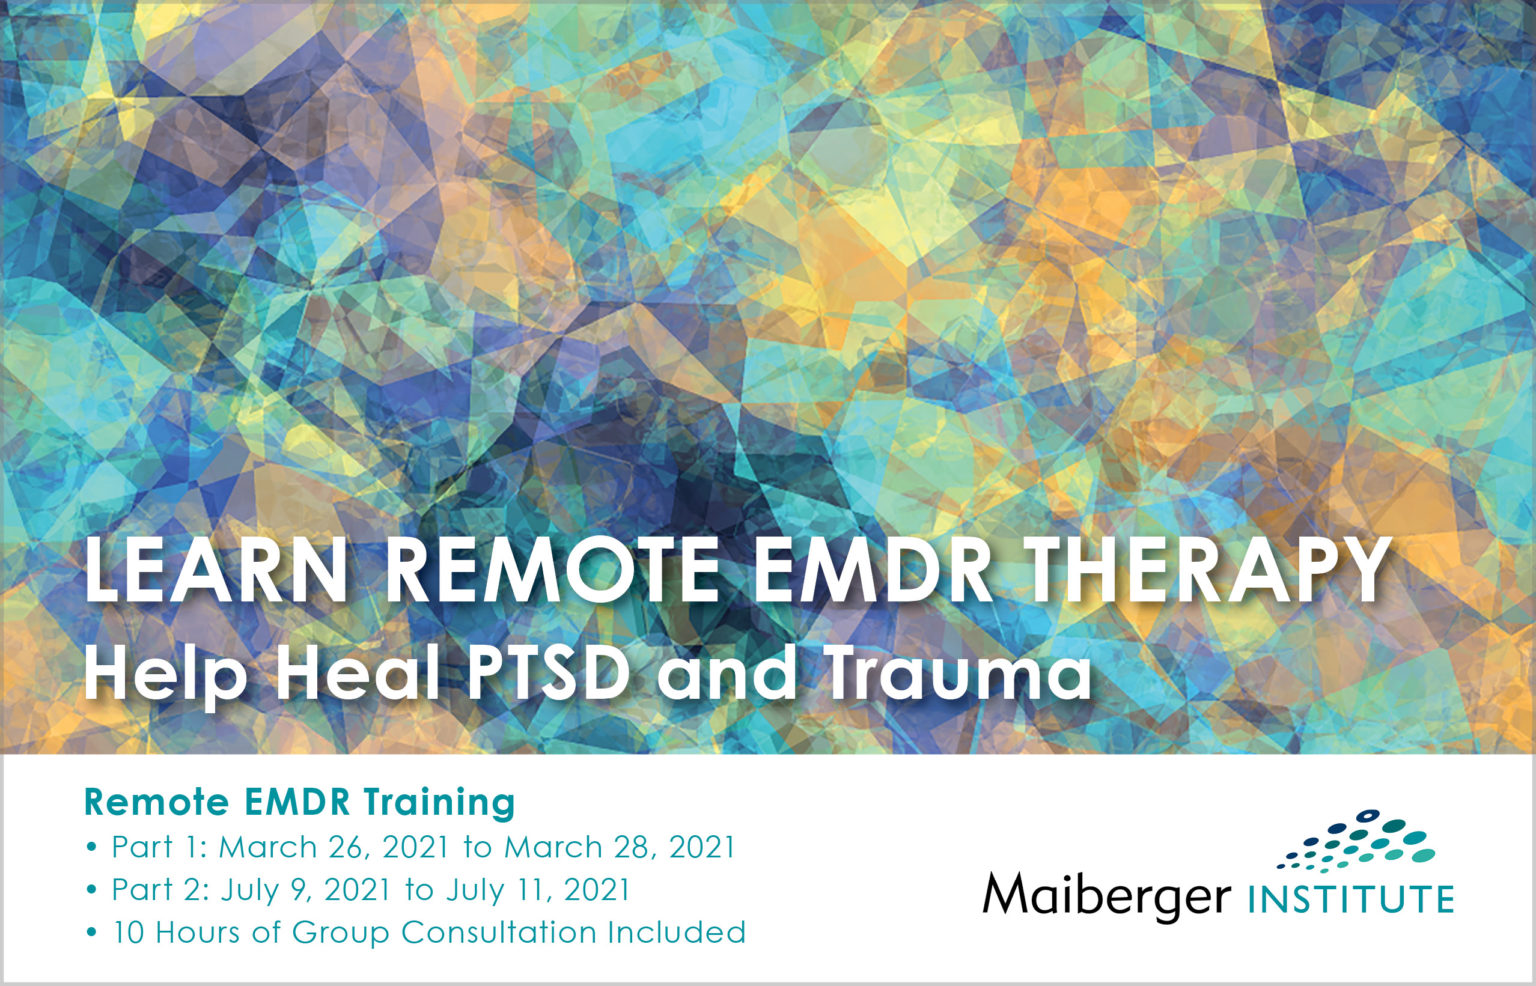 Remote EMDR Training - Part 1: March 26, 2021 to March 28, 2021 - Part